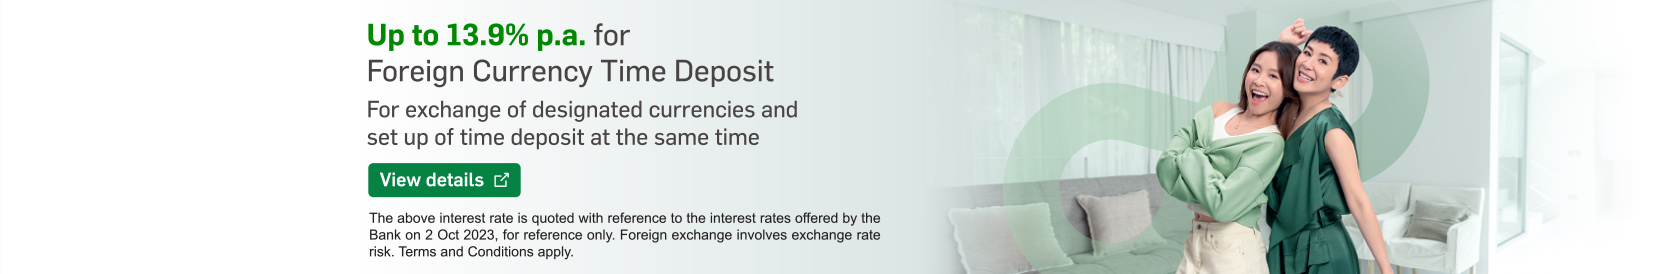 View details, up to 13% p.a. for Foreign Currency Time Deposit (Opens in a new window)